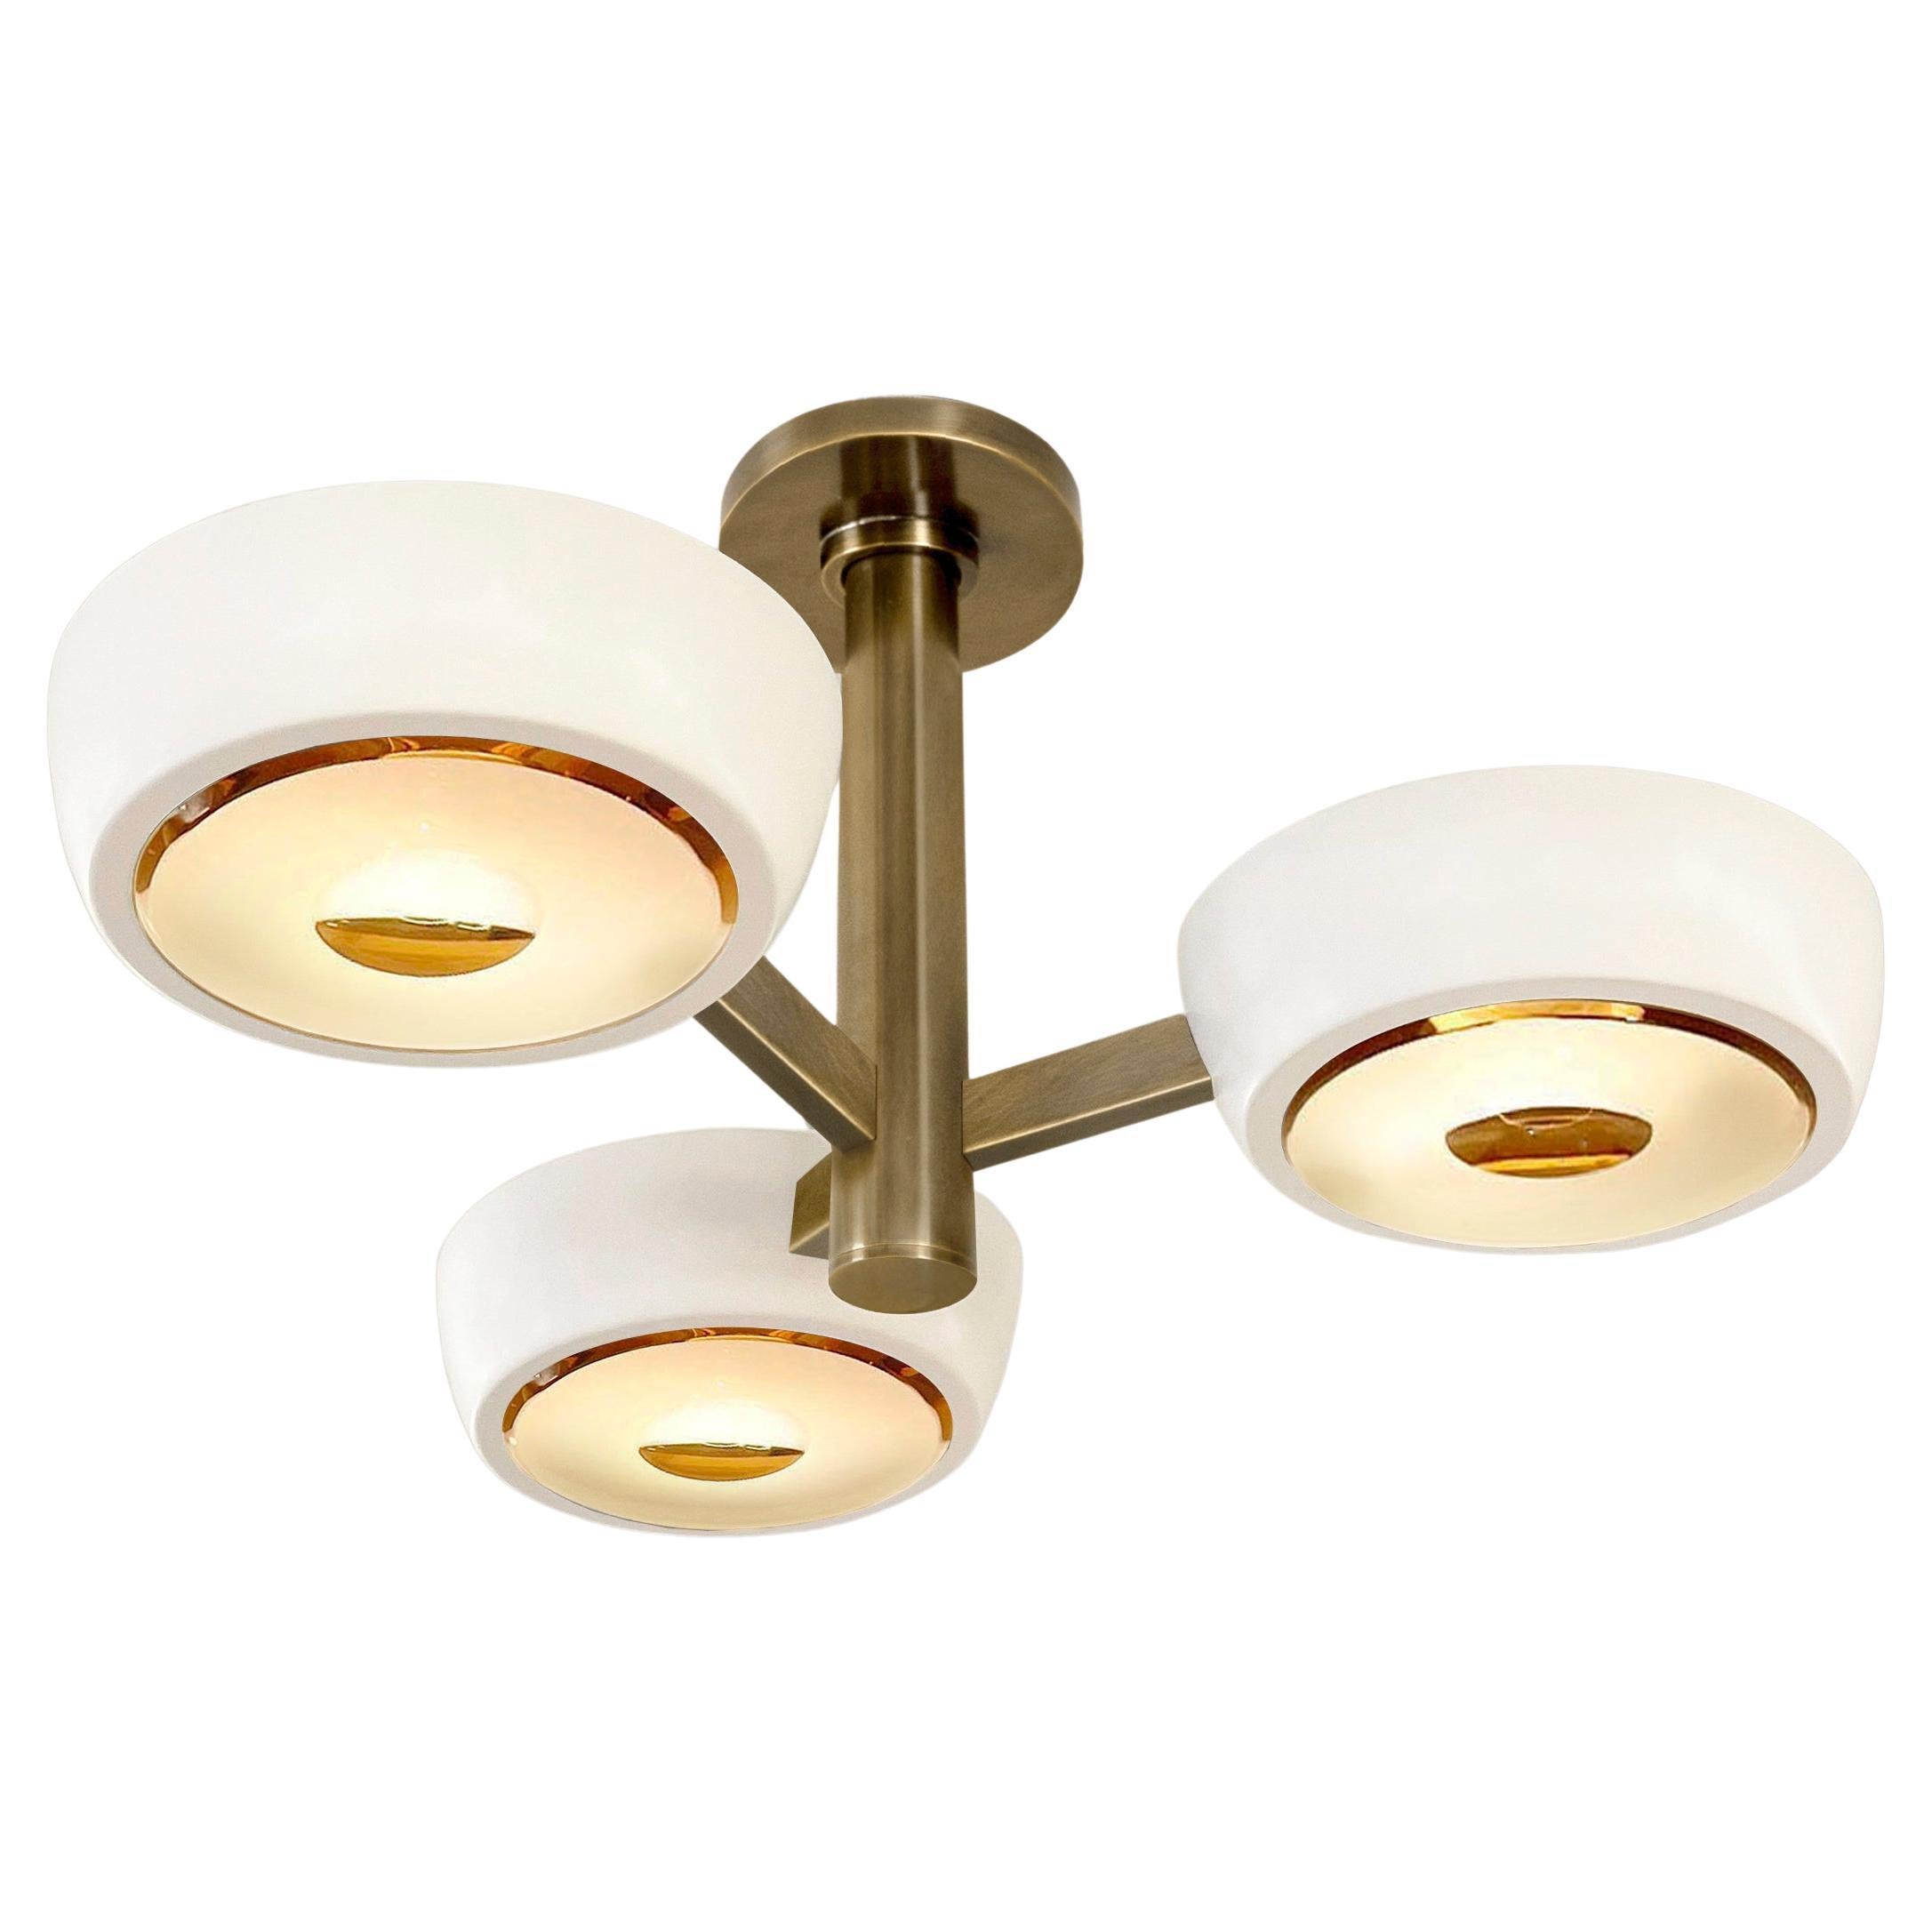 Rose Piccolo Ceiling Light by Gaspare Asaro- Rose Glass and Bronze Finish For Sale